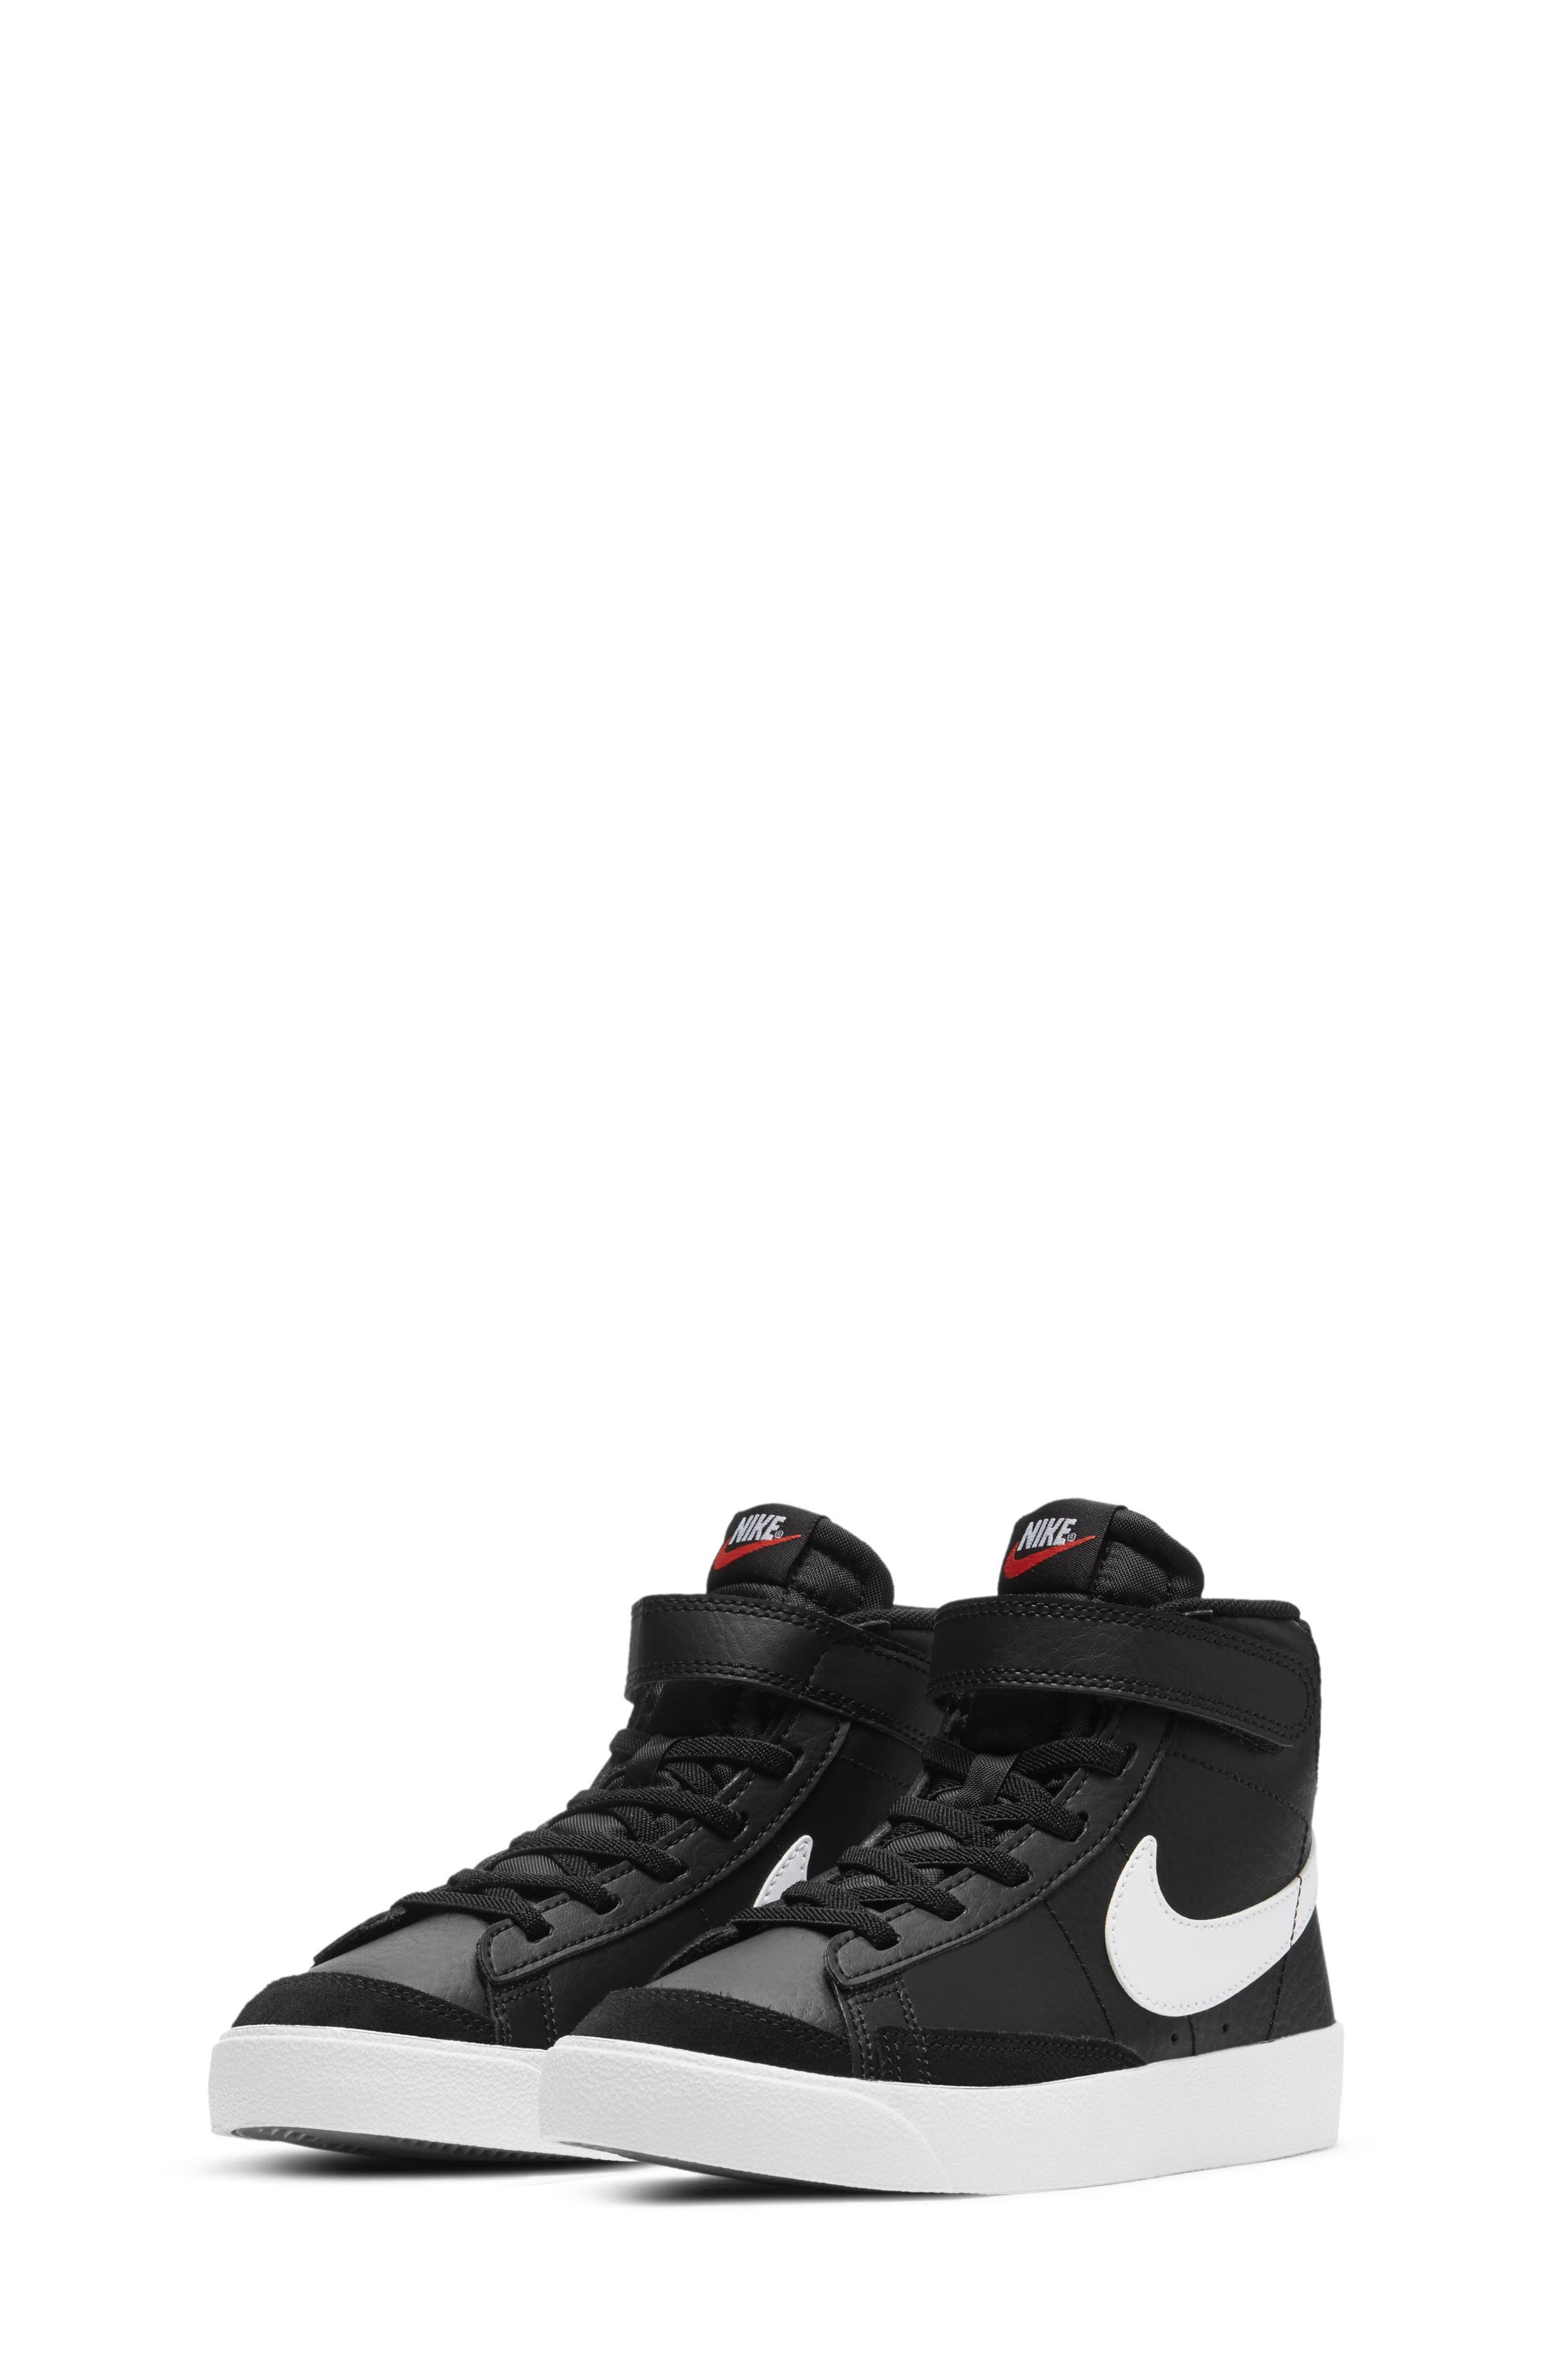 all black toddler tennis shoes